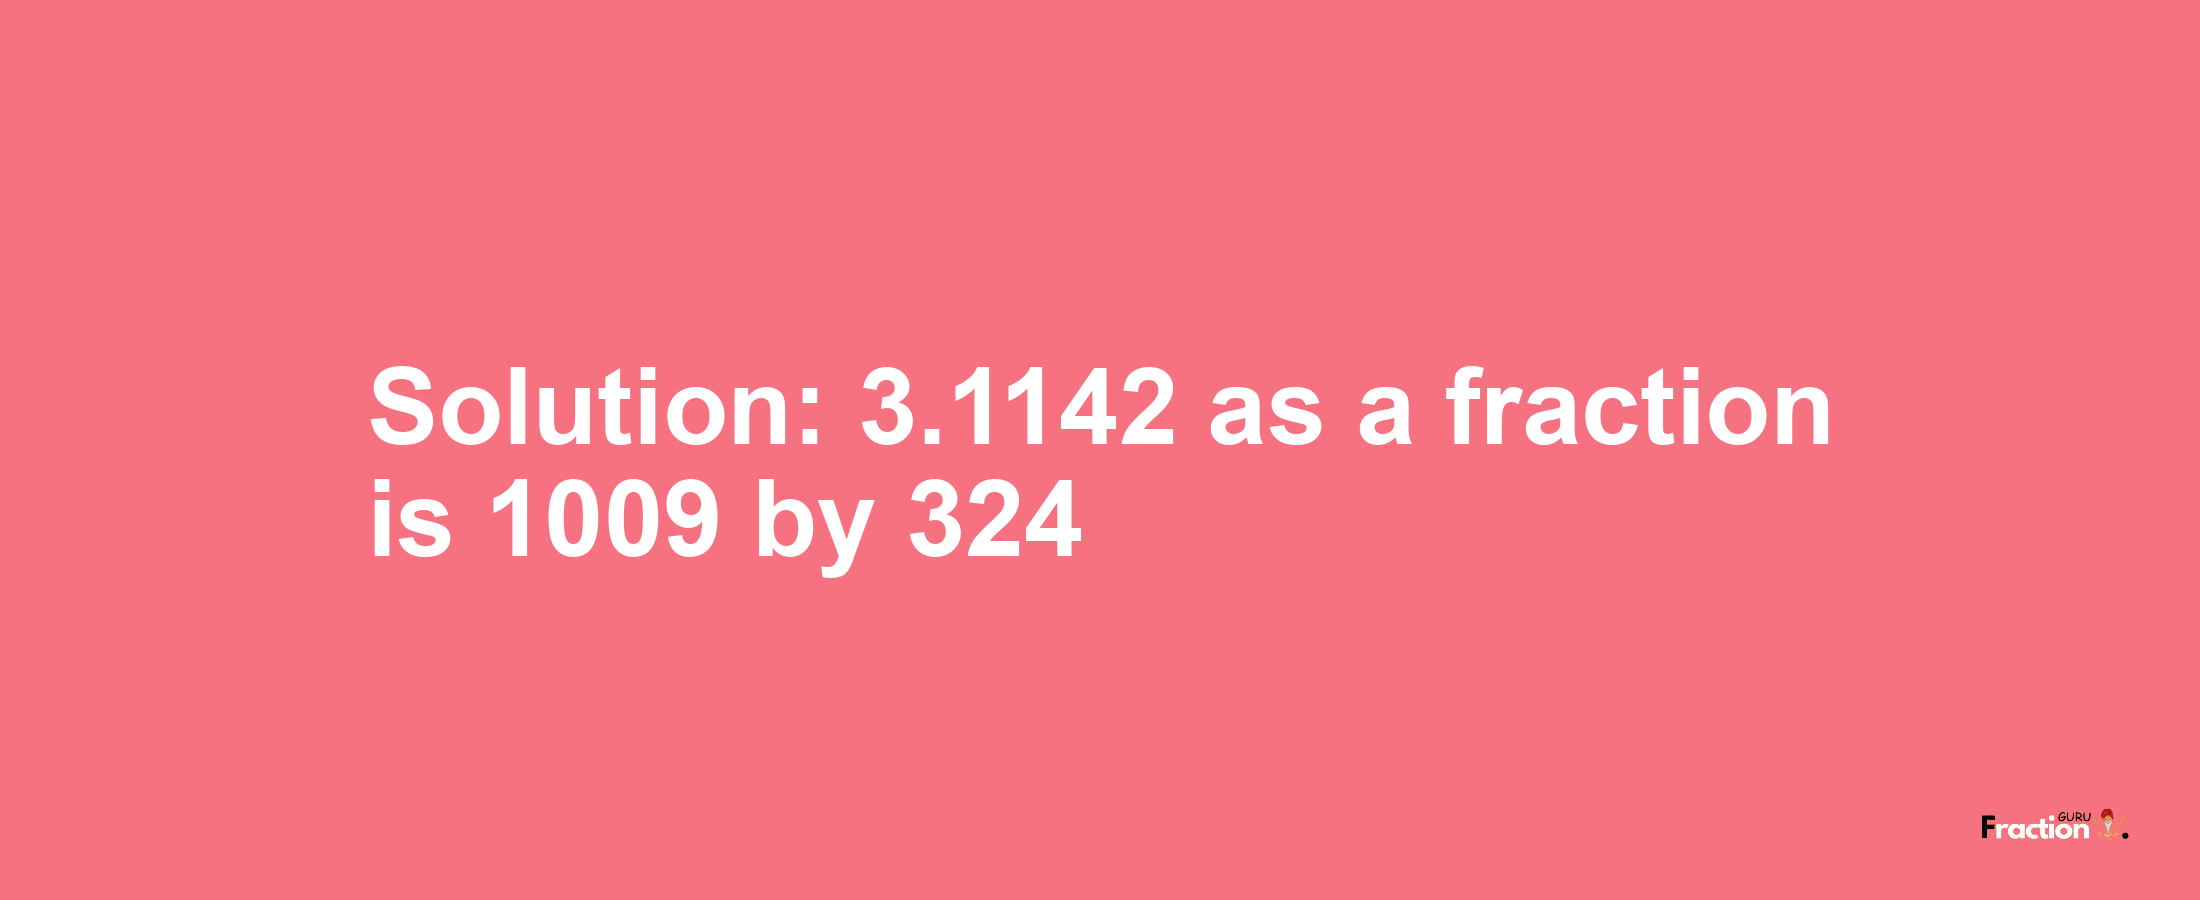 Solution:3.1142 as a fraction is 1009/324